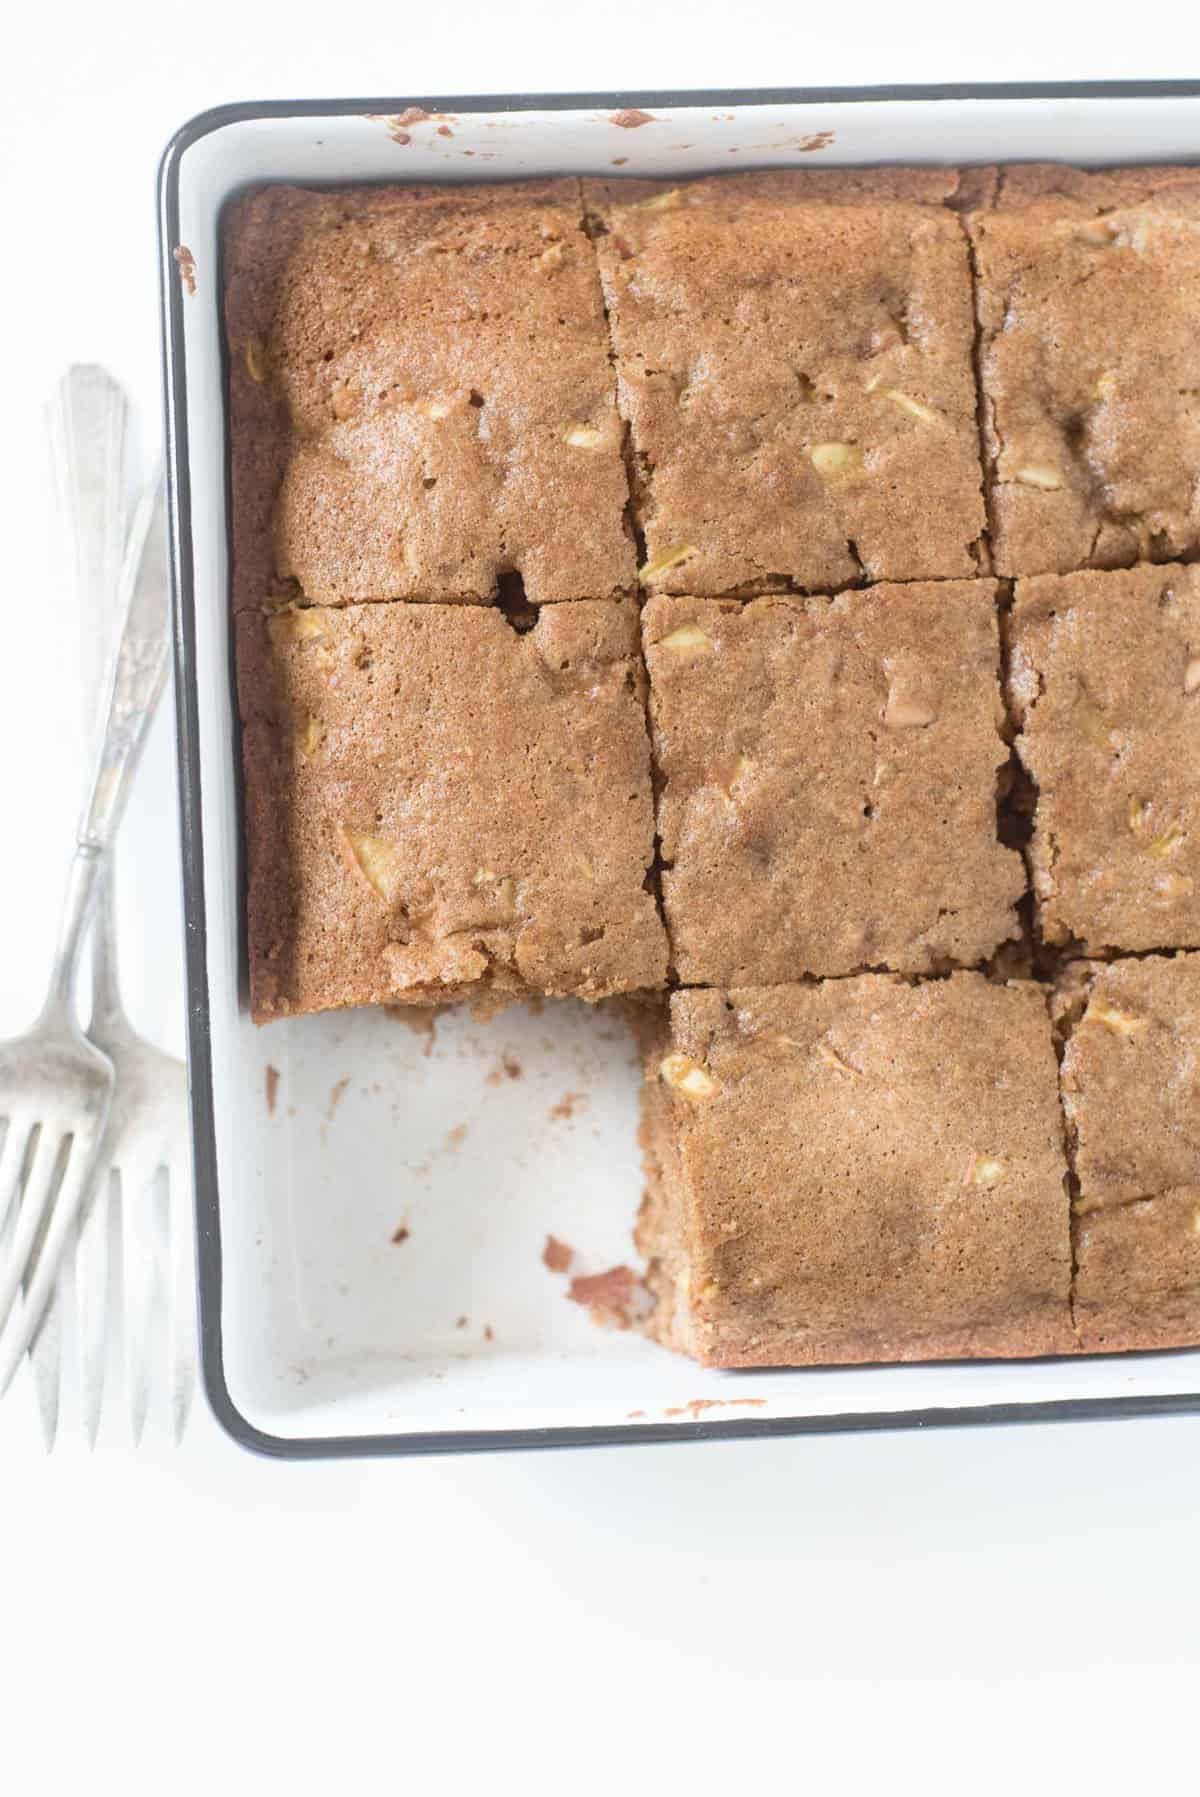 A square baking dish of easy apple cake cut into squares